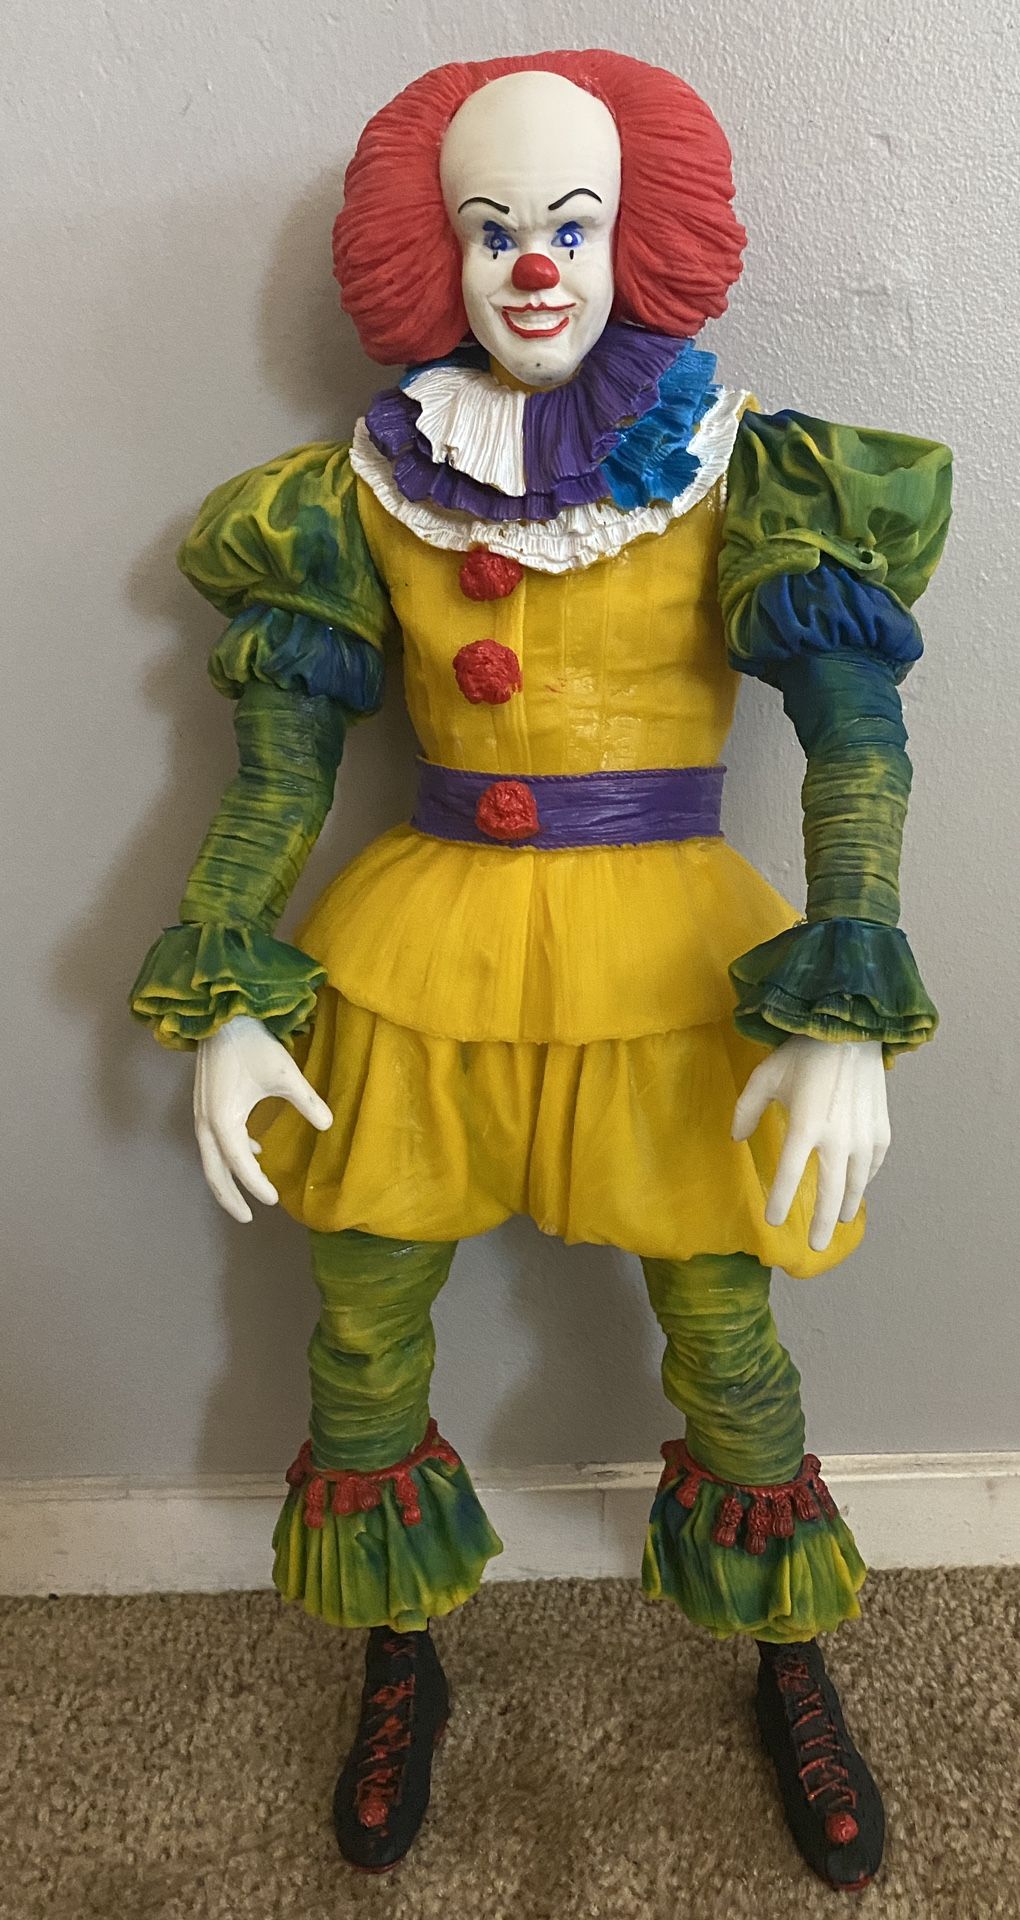 RARE IT Pennywise 18" Action Figure For Sale!